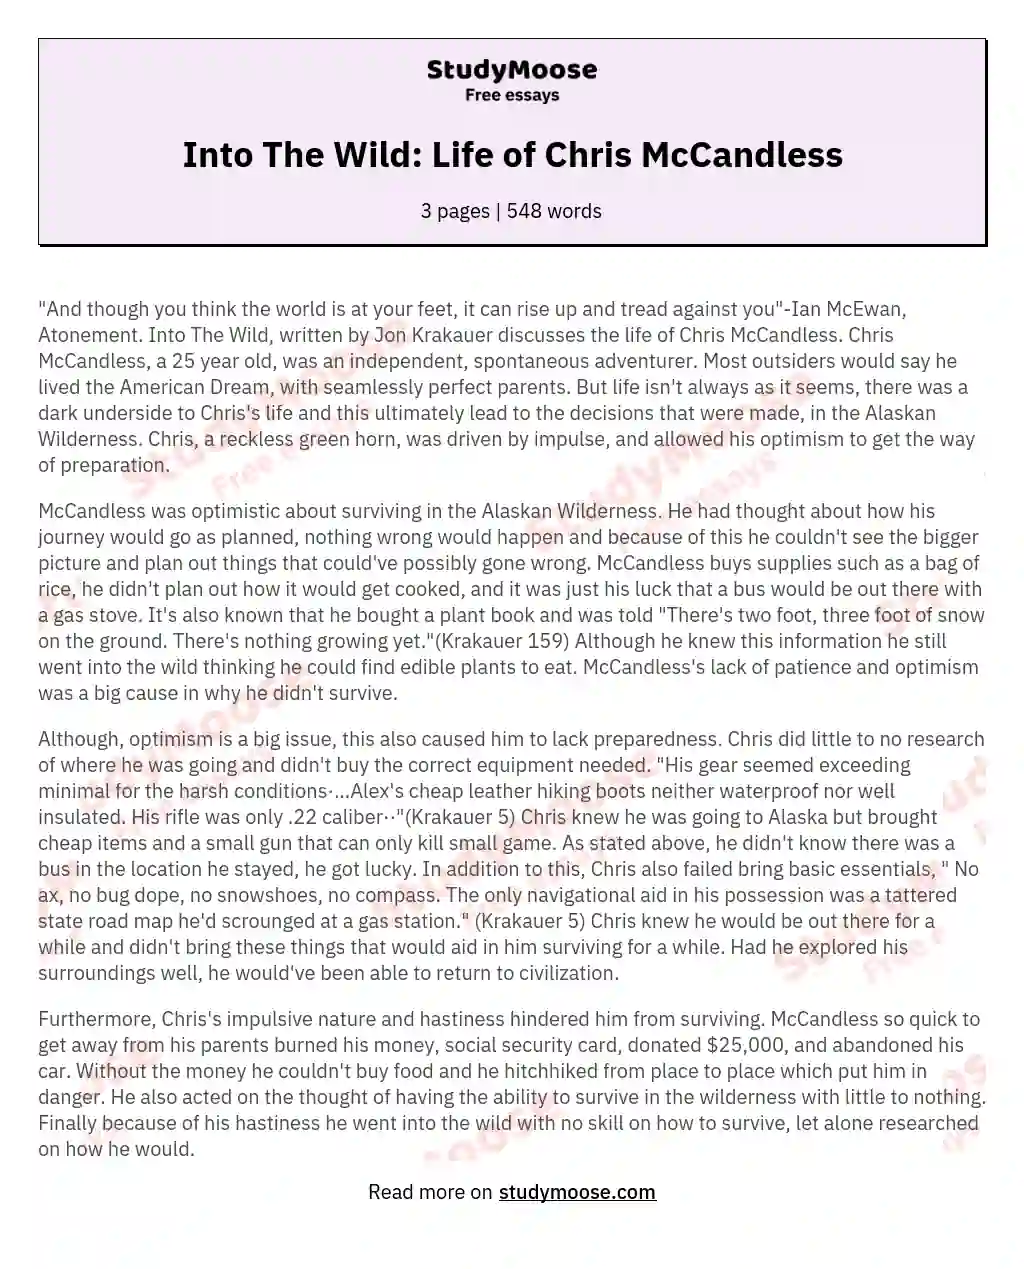 Into The Wild: Life of Chris McCandless